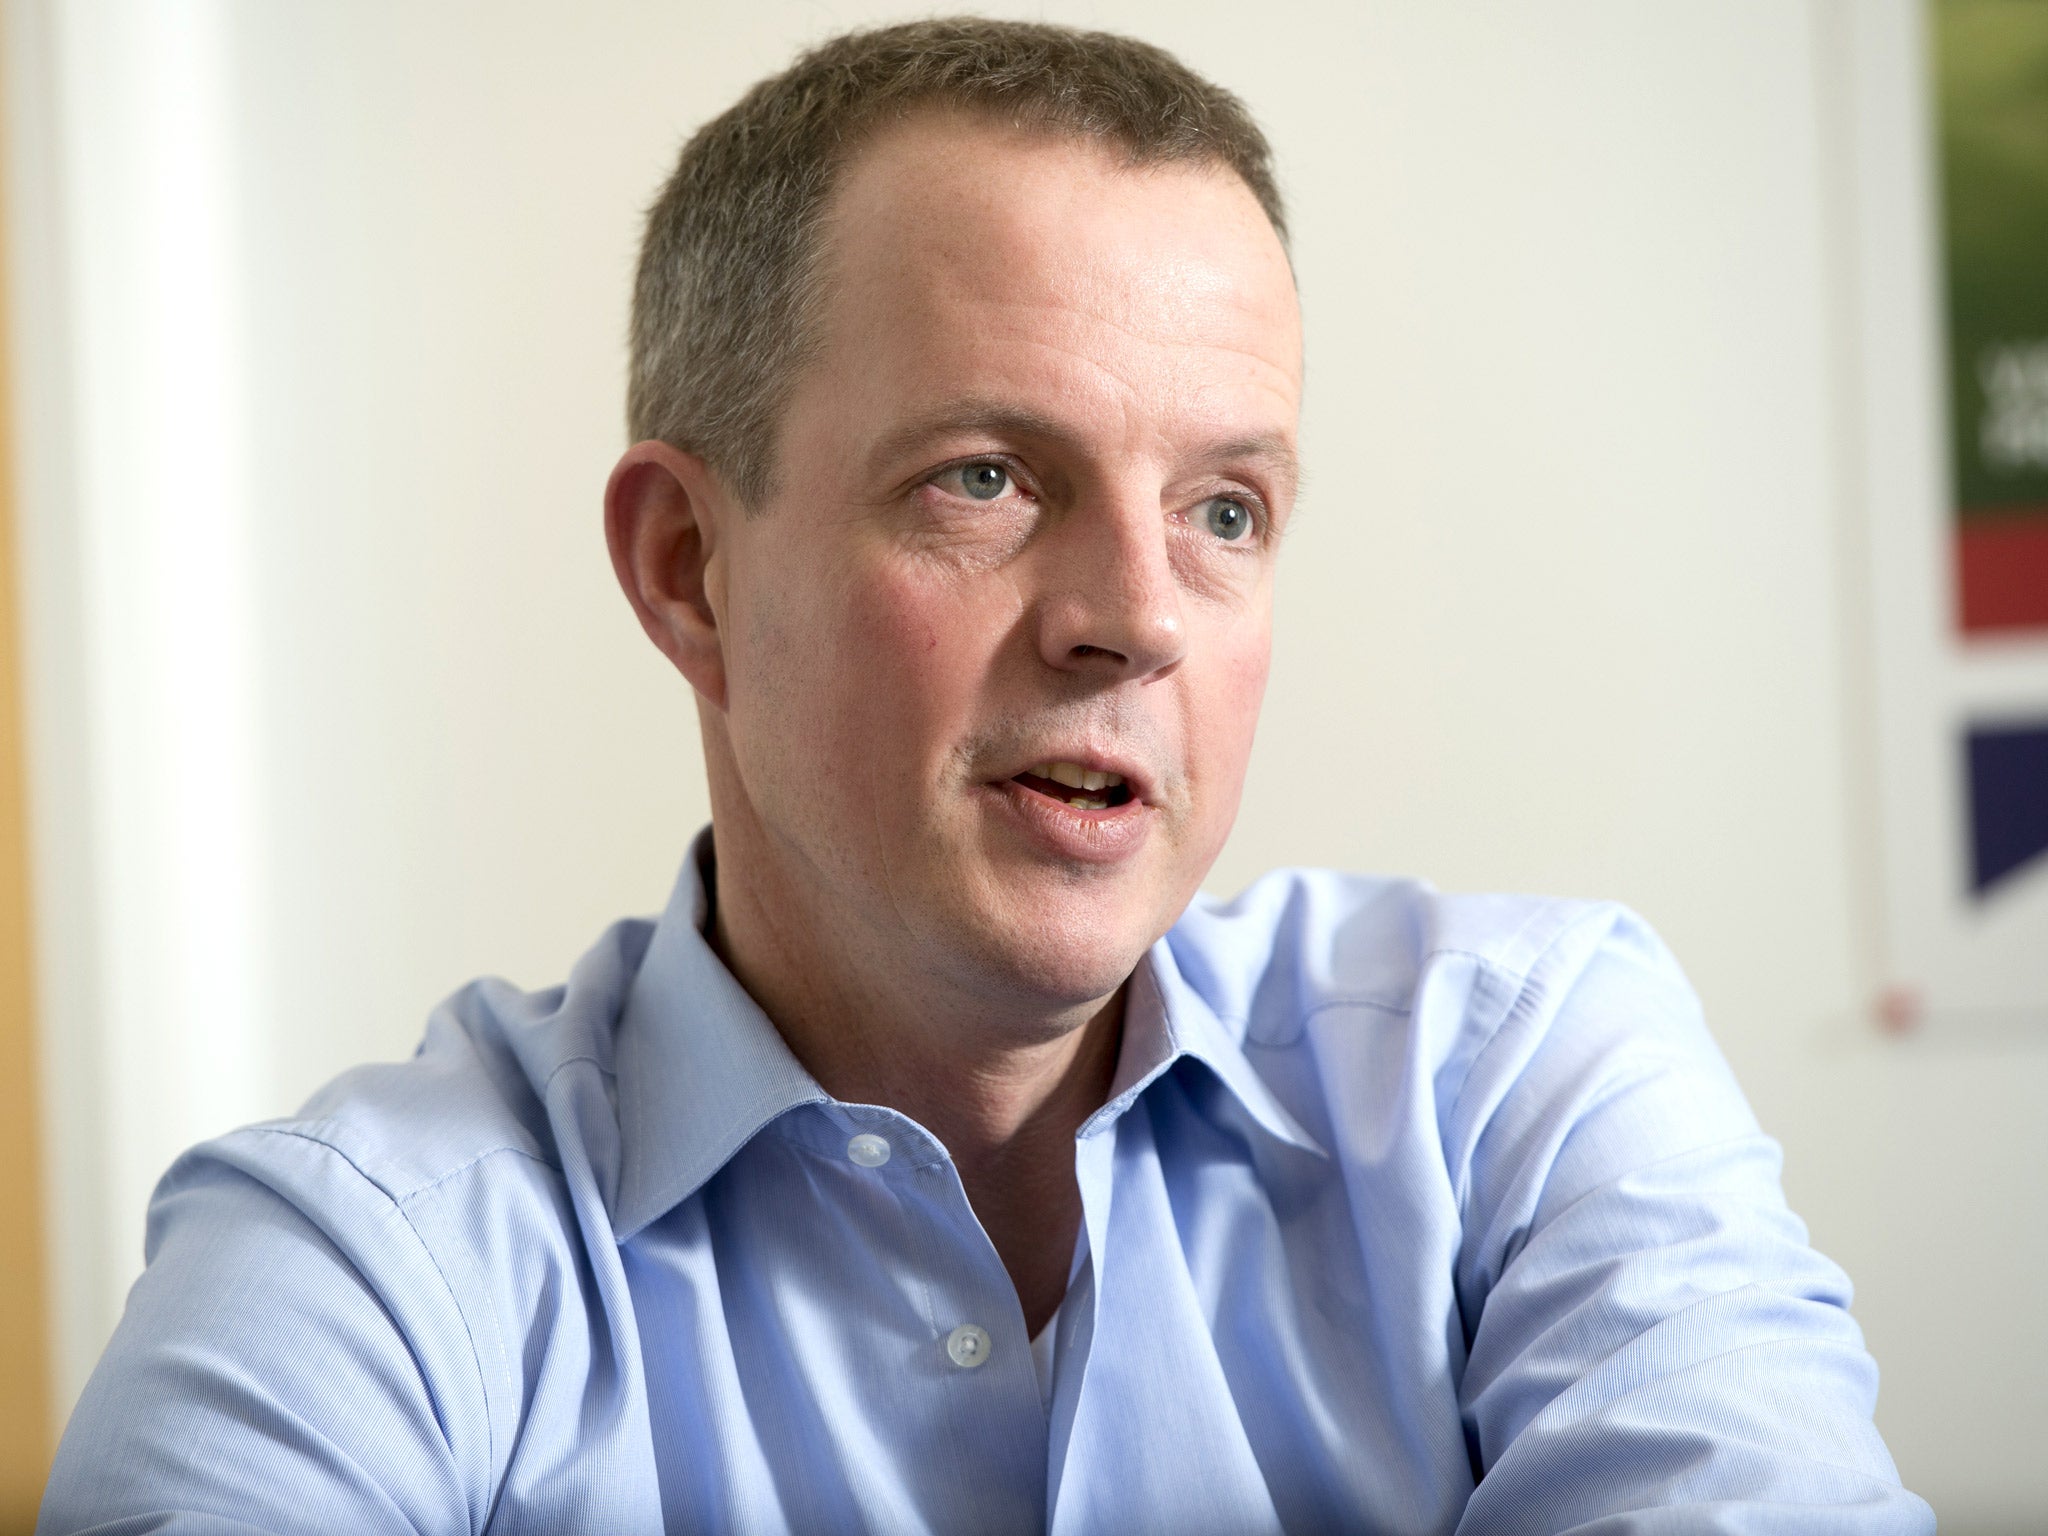 Nick Boles, business minister, who is calling for revisions of the Bill